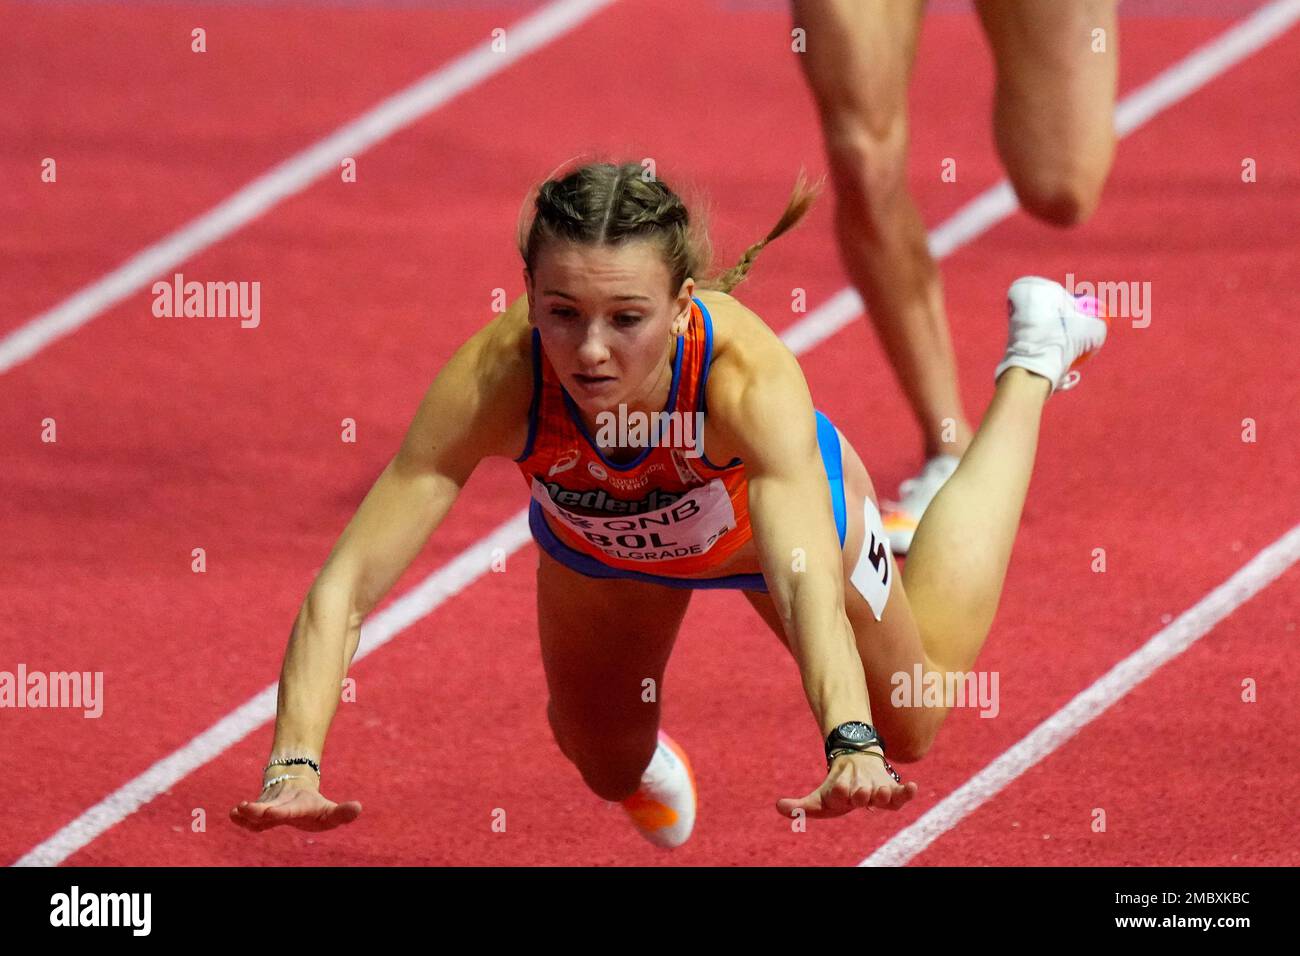 Femke Bol, of the Netherlands, falls down and hits her head on the ground crossing the finish line in a Womens 400 meters semifinal at the World Athletics Indoor Championships in Belgrade,